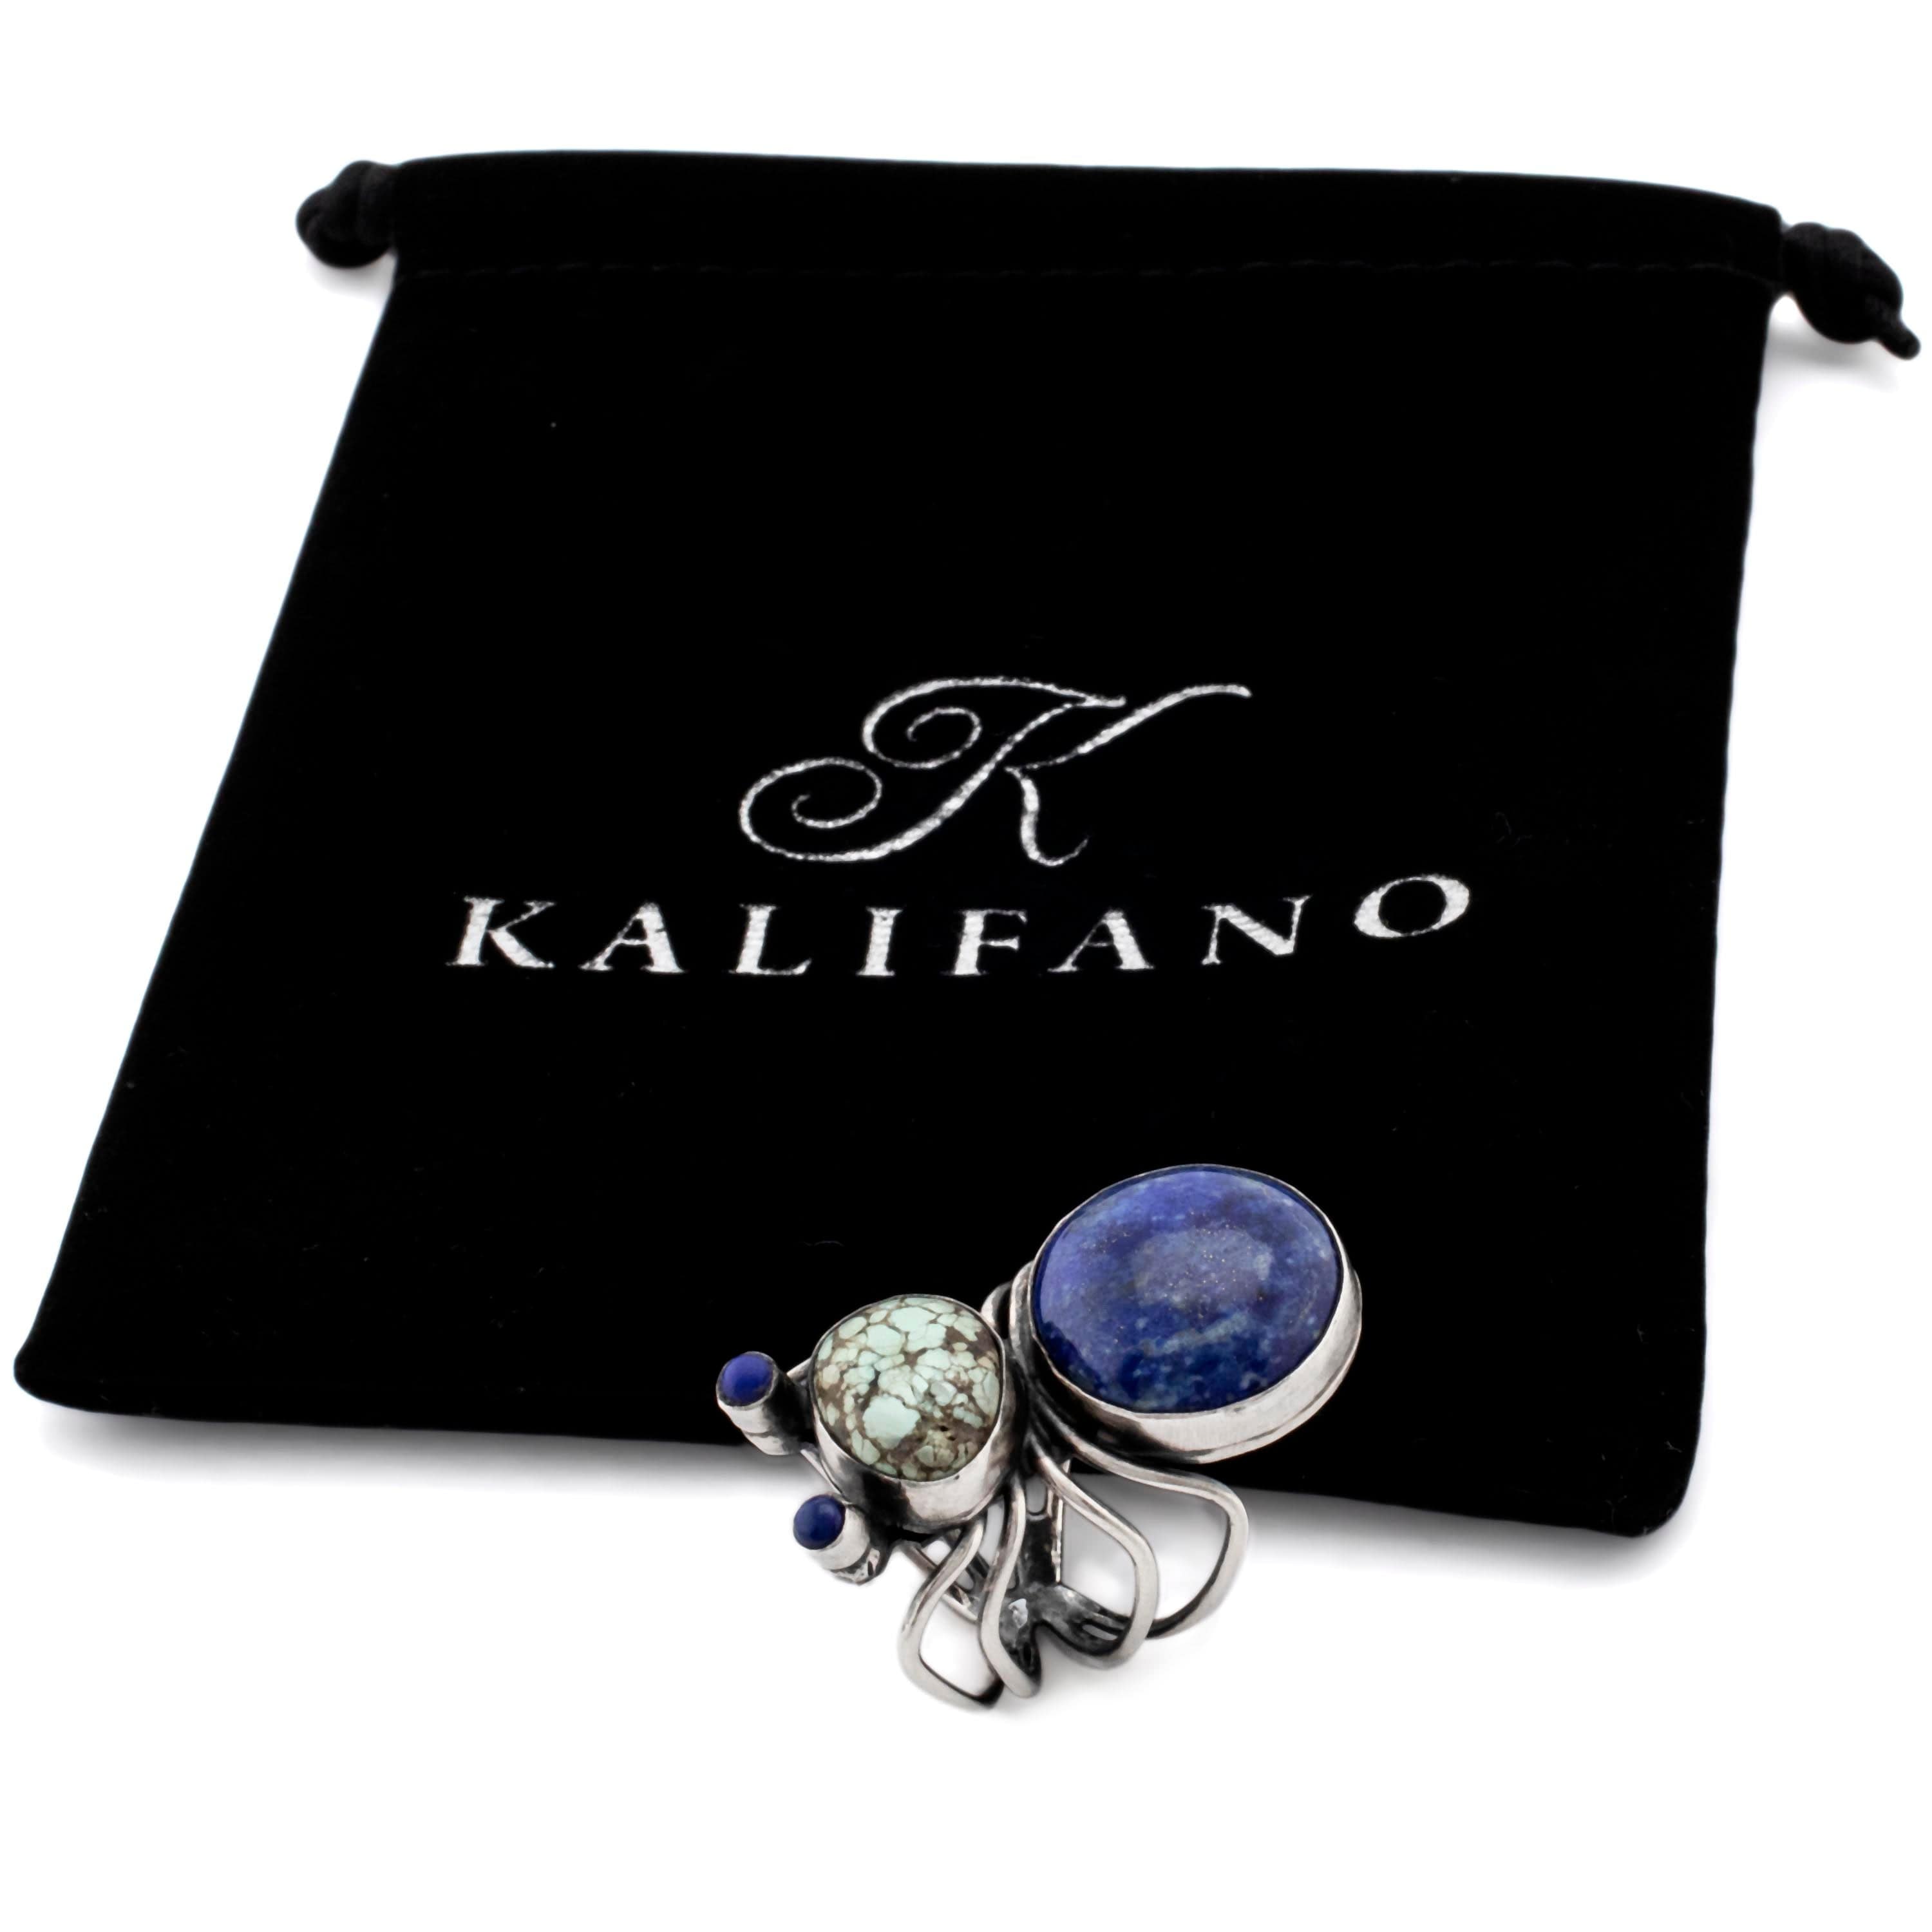 Kalifano Native American Jewelry 8 Herbert Ration Carico Lake and Lapis Spider USA Native American Made 925 Sterling Silver Ring NAR2400.004.8